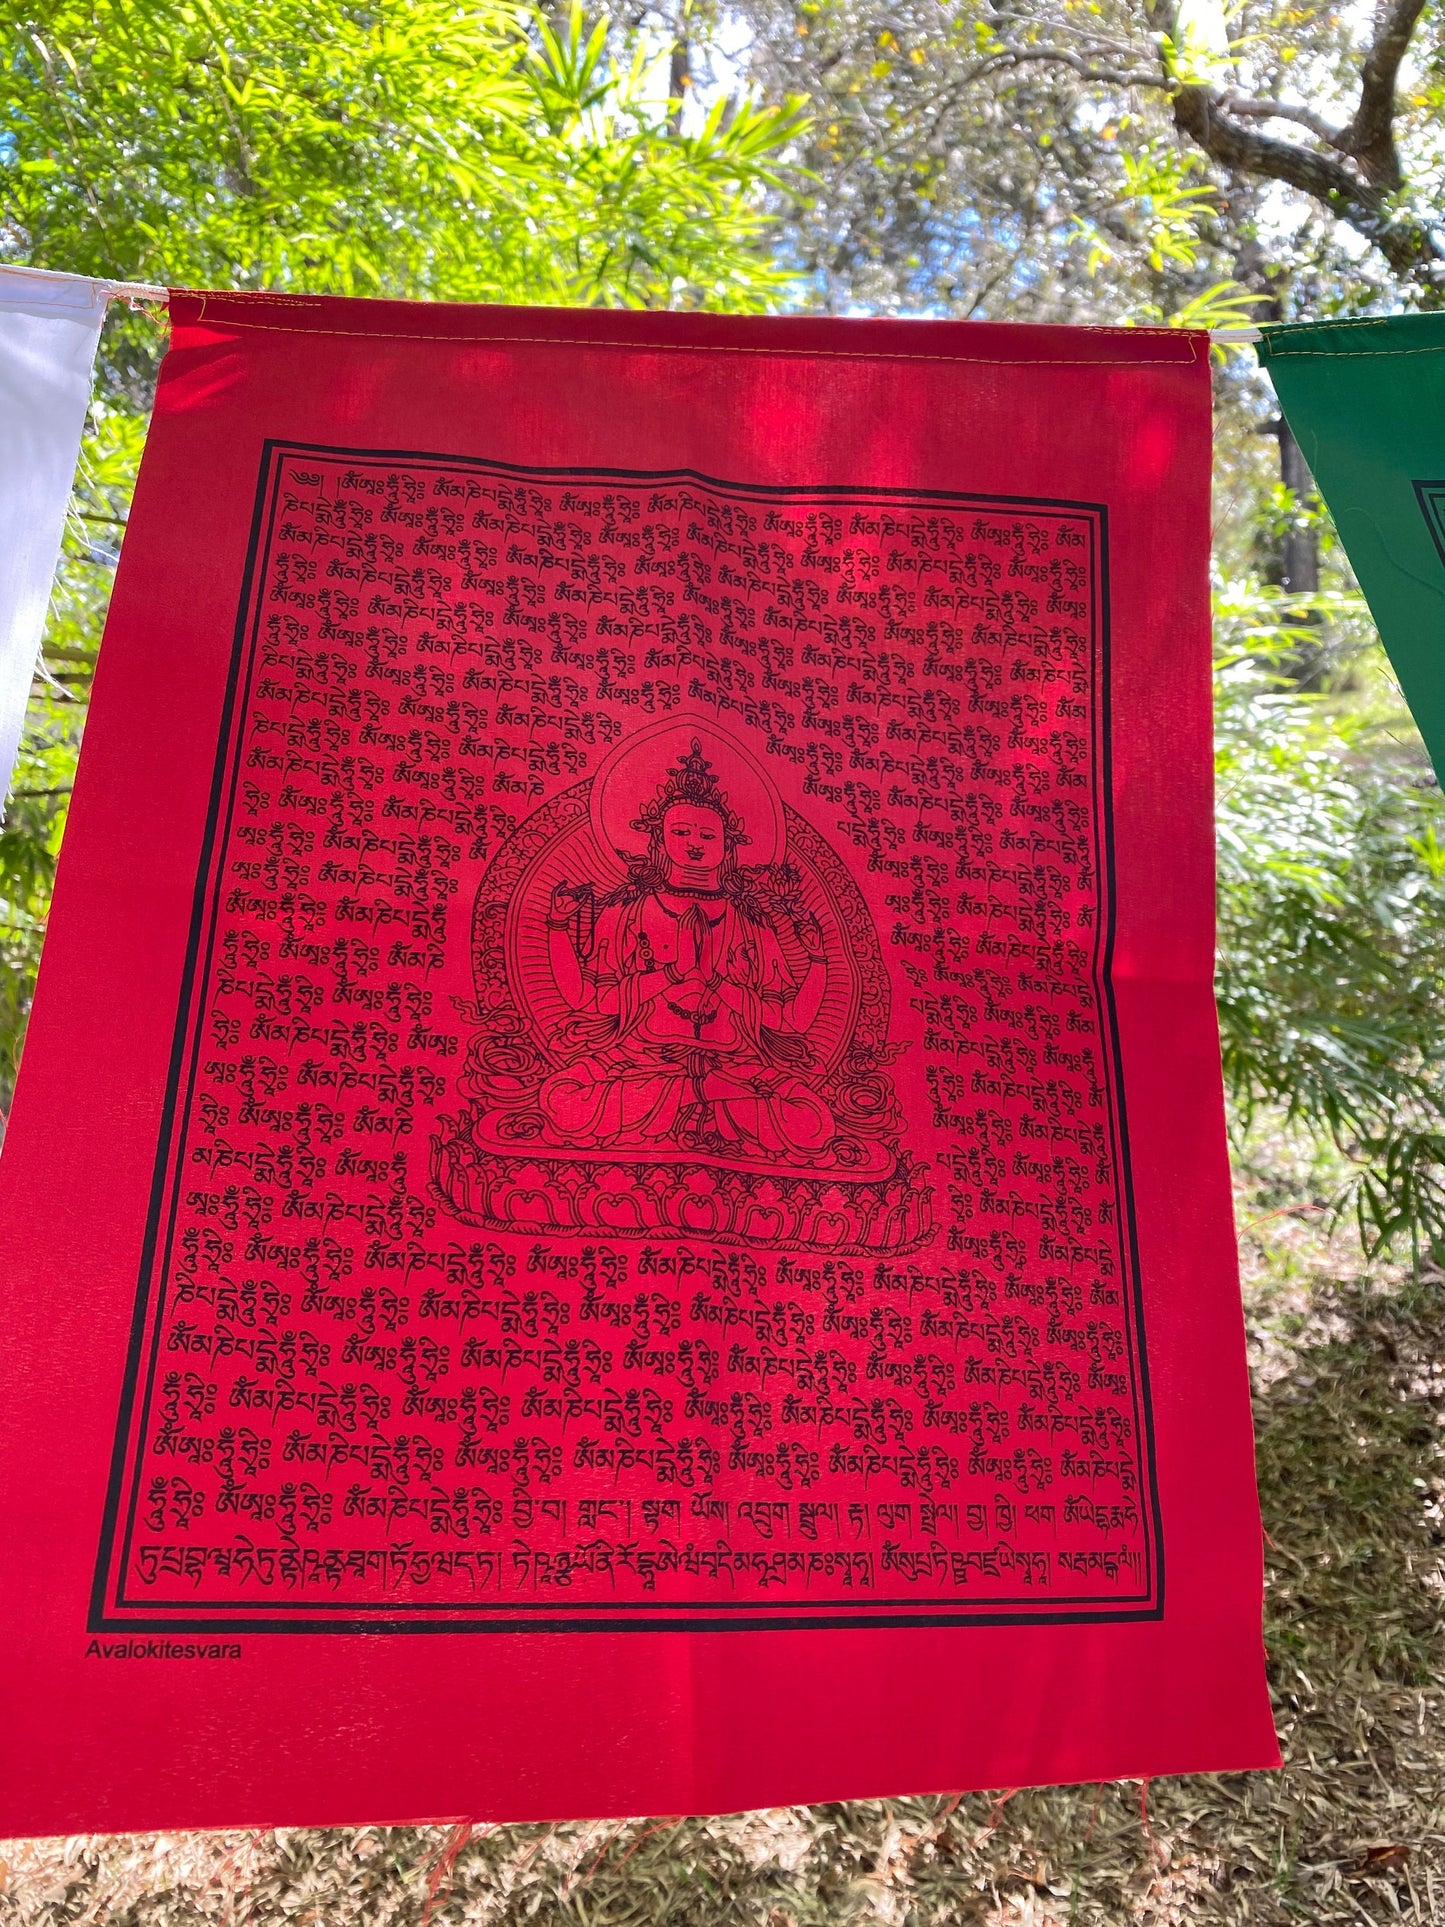 A close up of 1 red Chenrezig prayer flag in 5 colors, each 14x17 inches, depicting the Buddha of Compassion hanging outdoors.